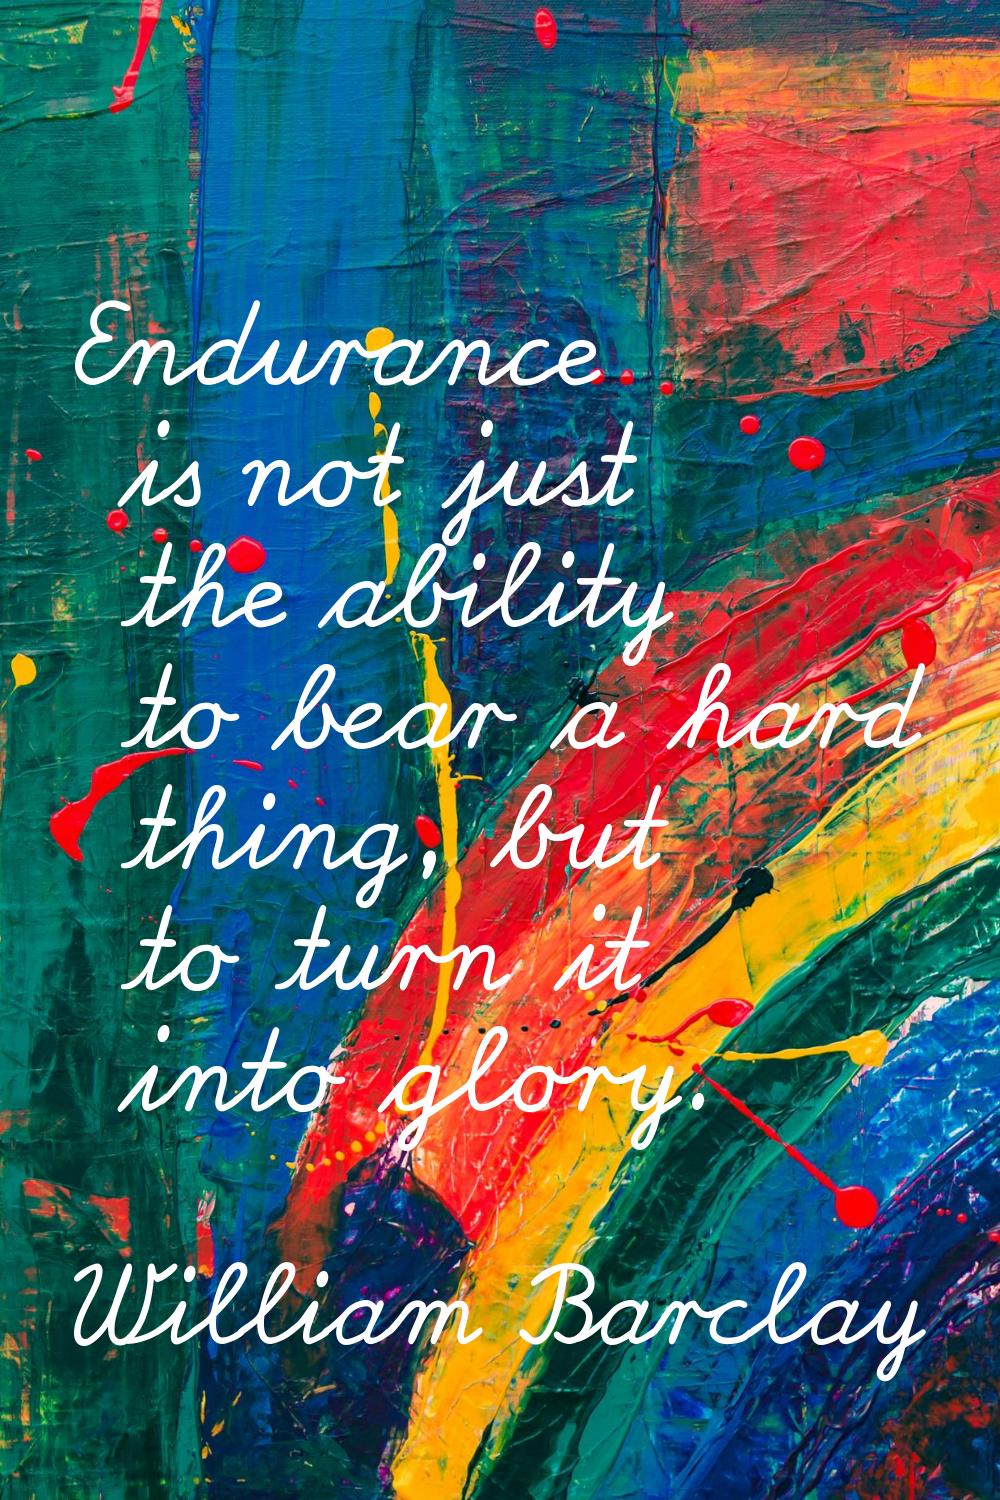 Endurance is not just the ability to bear a hard thing, but to turn it into glory.